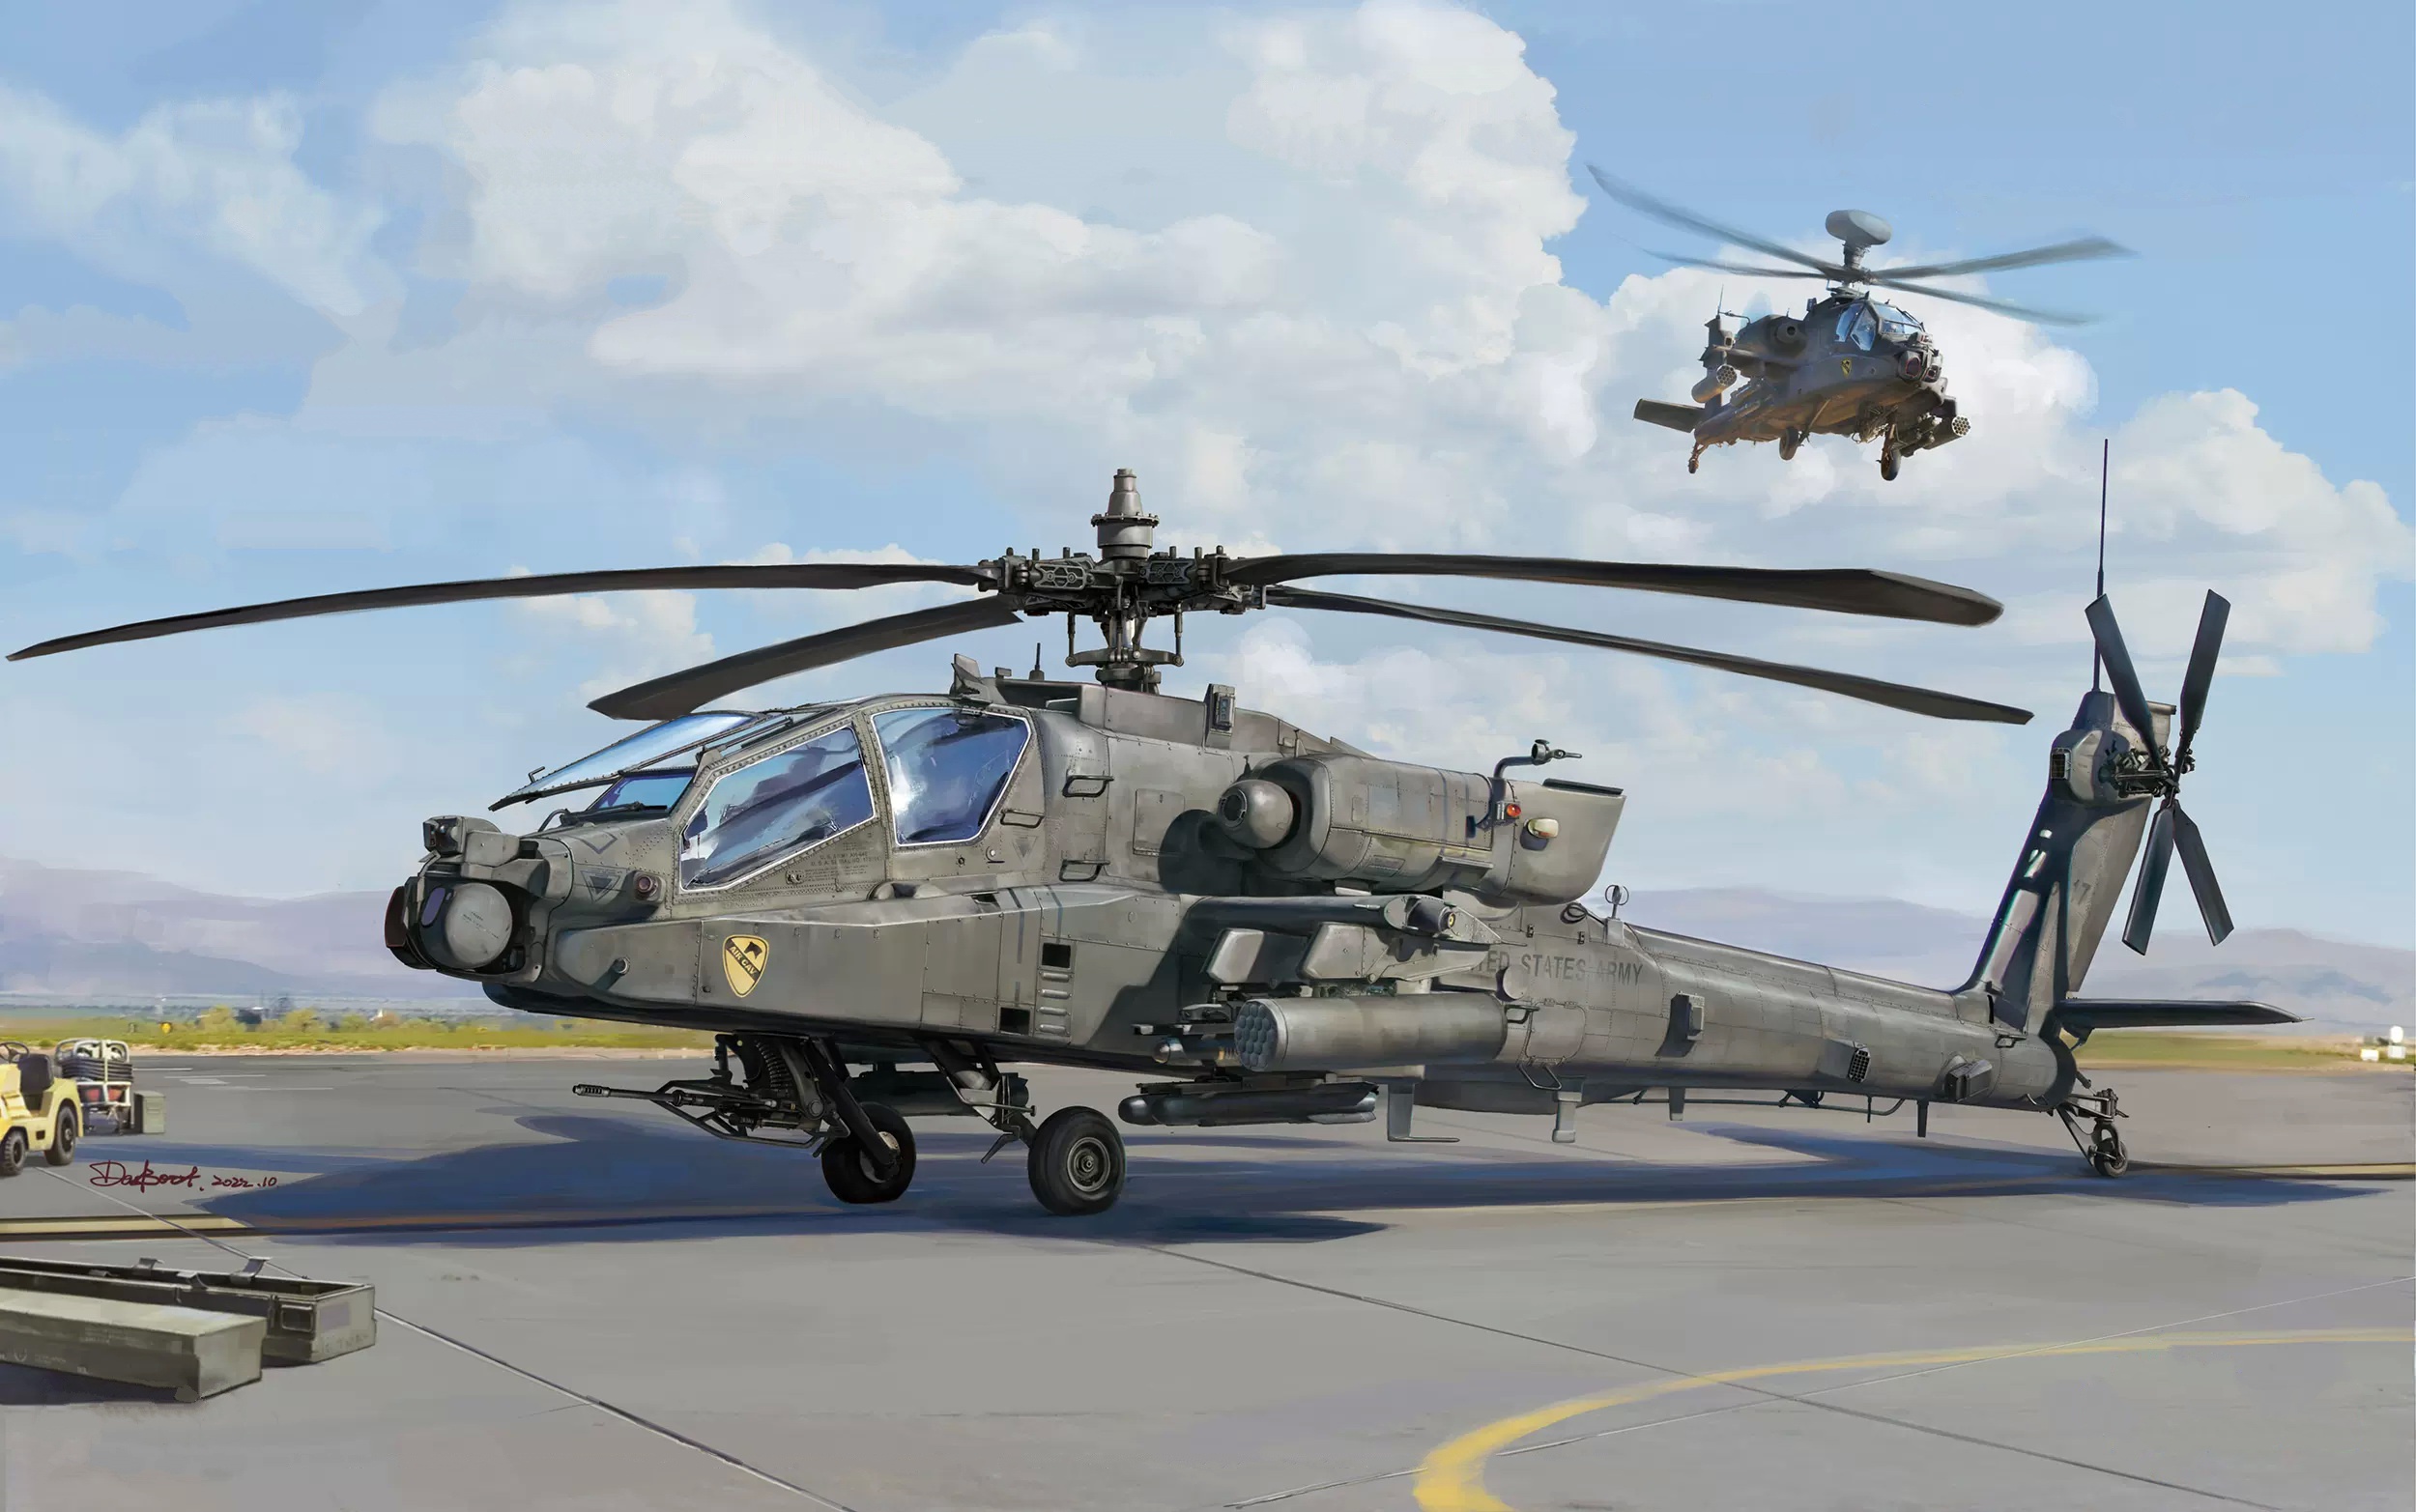 AH-64E Apache Guardian Attack Helicopter by Ju Hesong